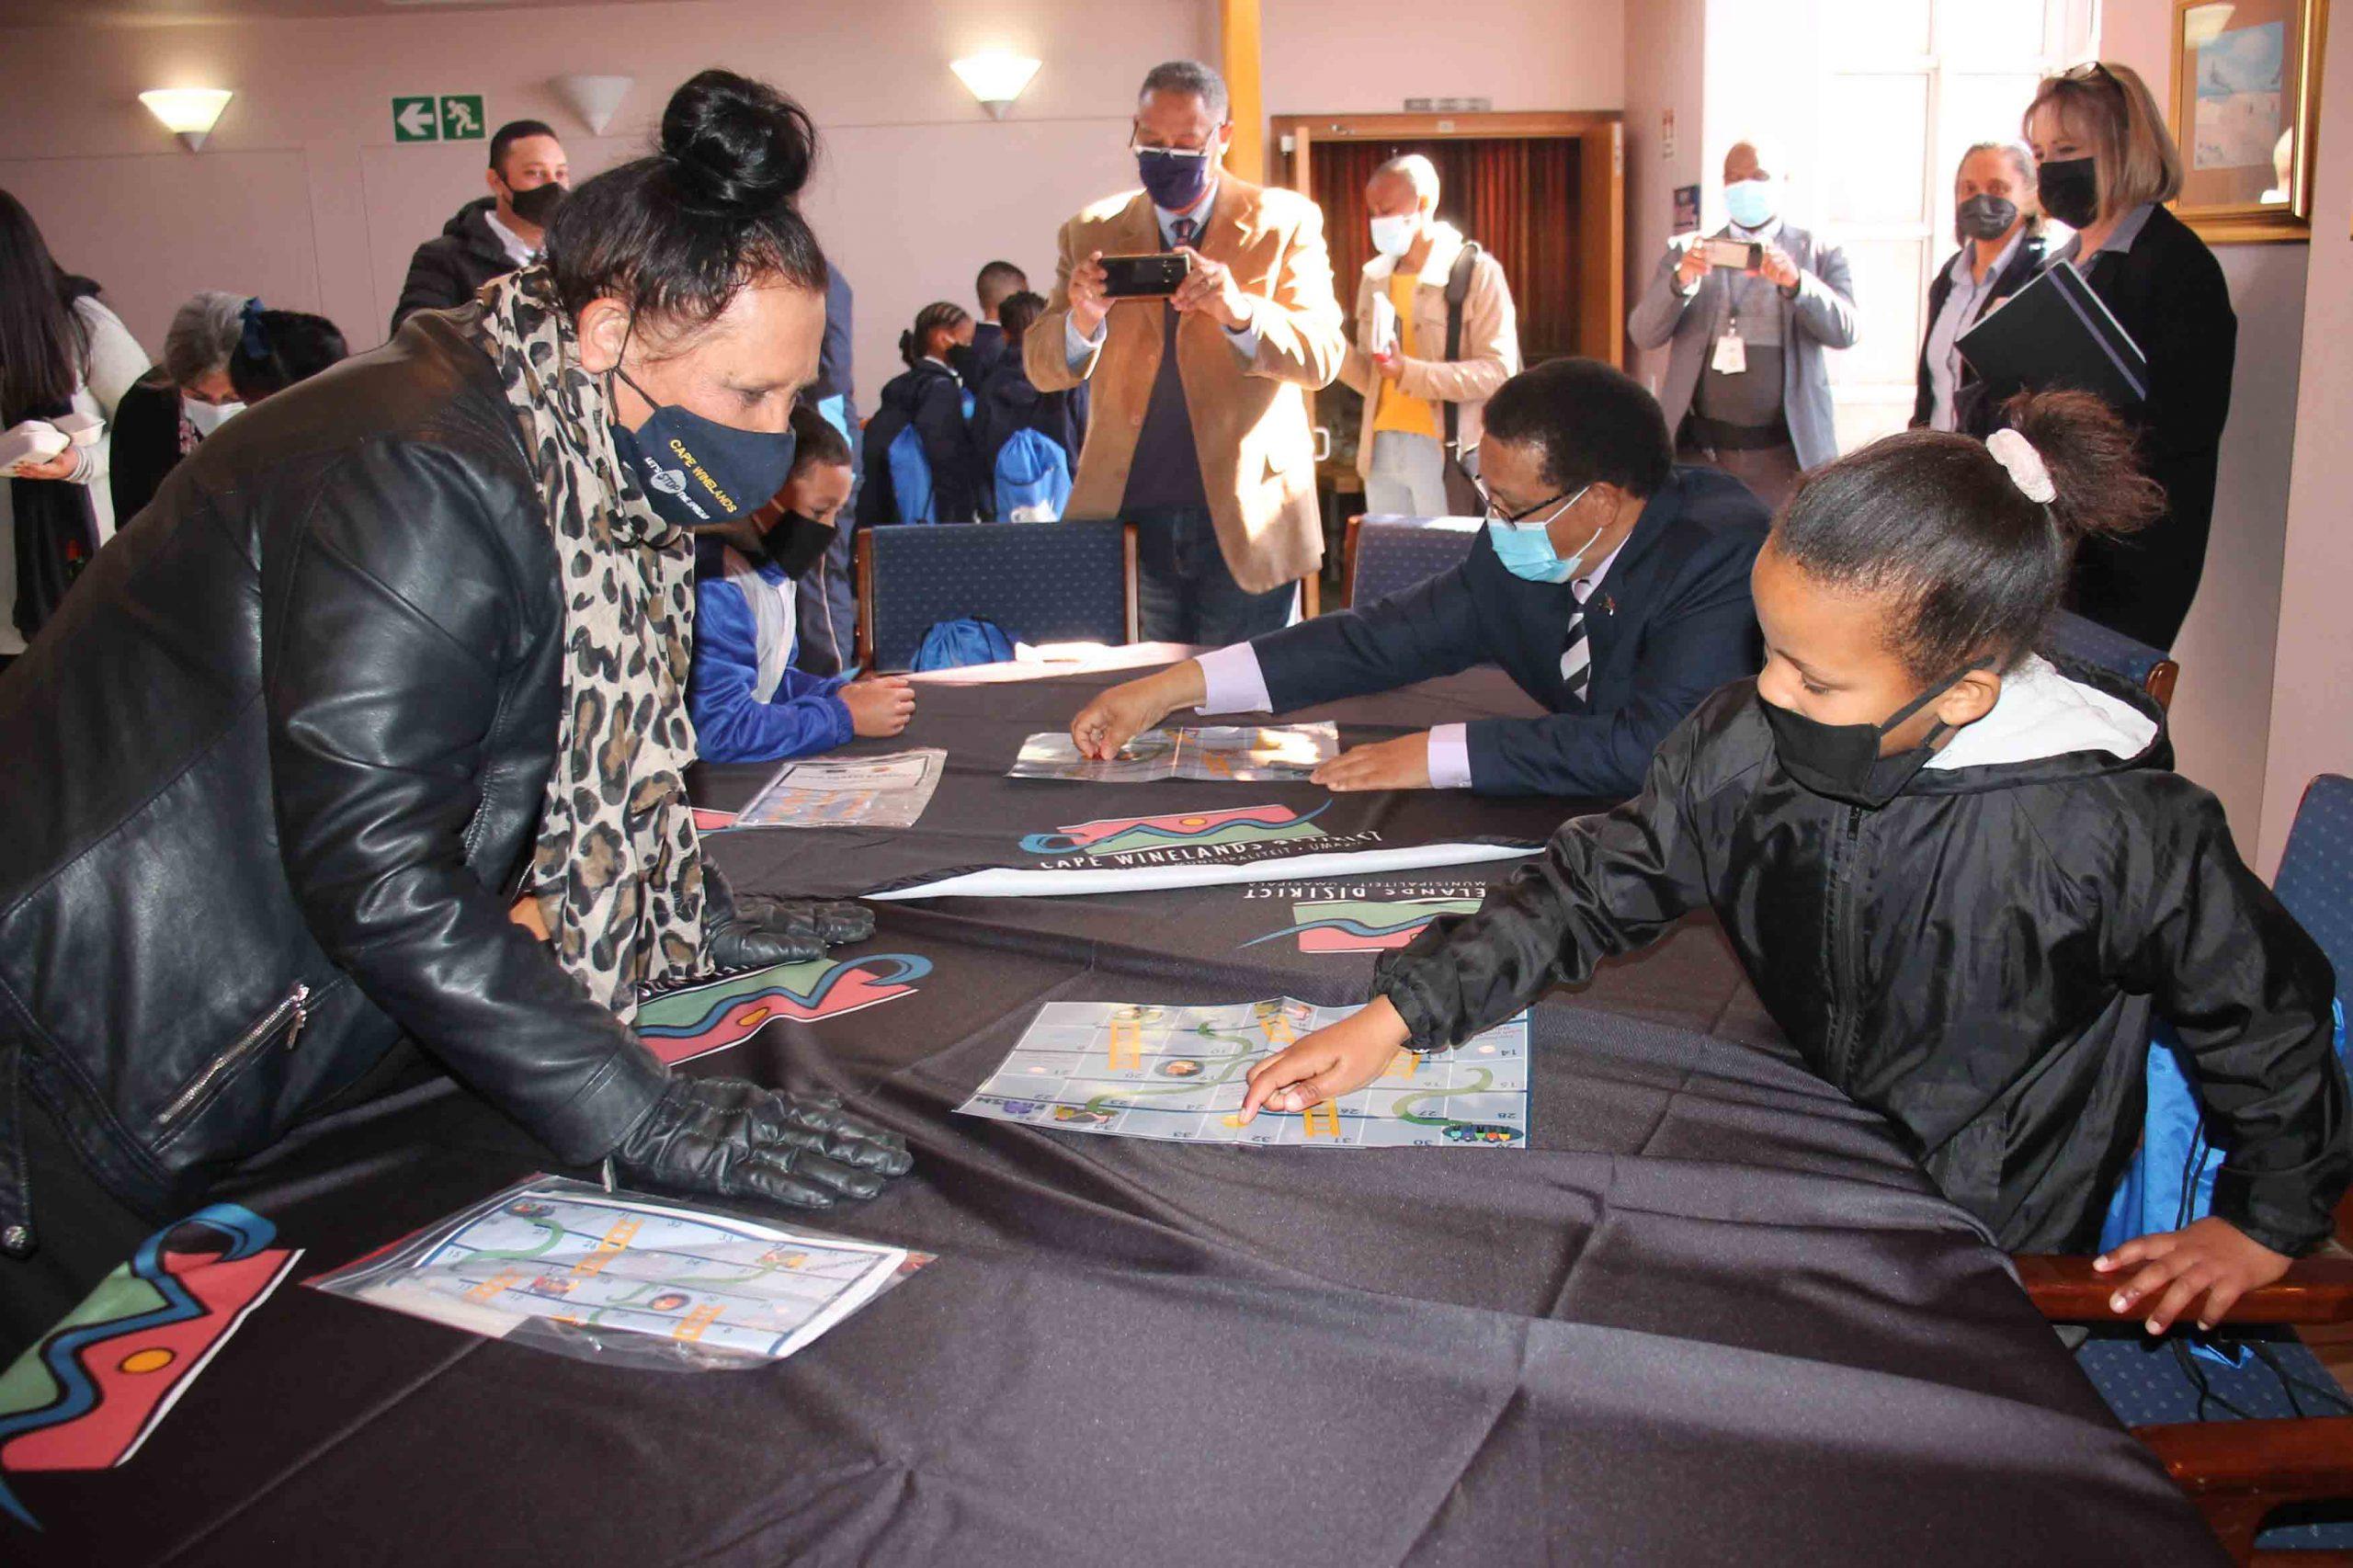 Snakes and Ladders Board game Launch